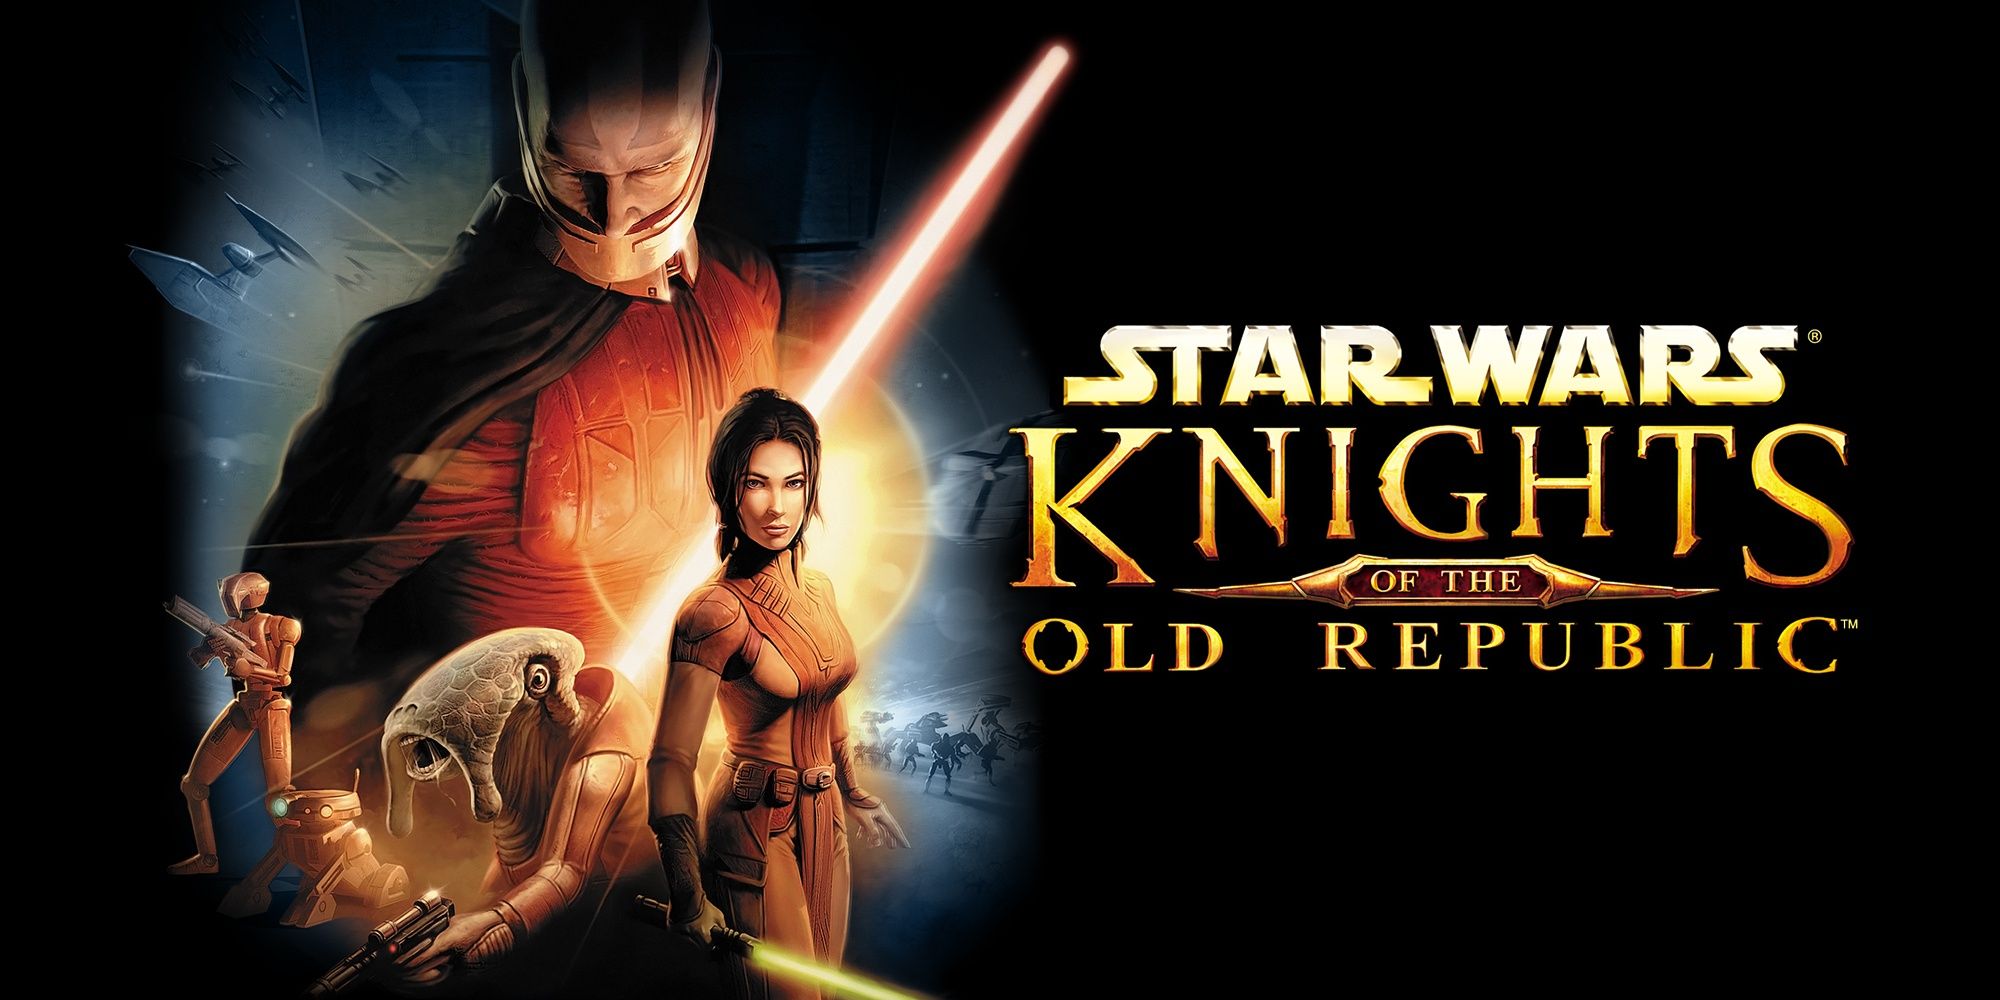 KOTOR Title Image Featuring Main Characters